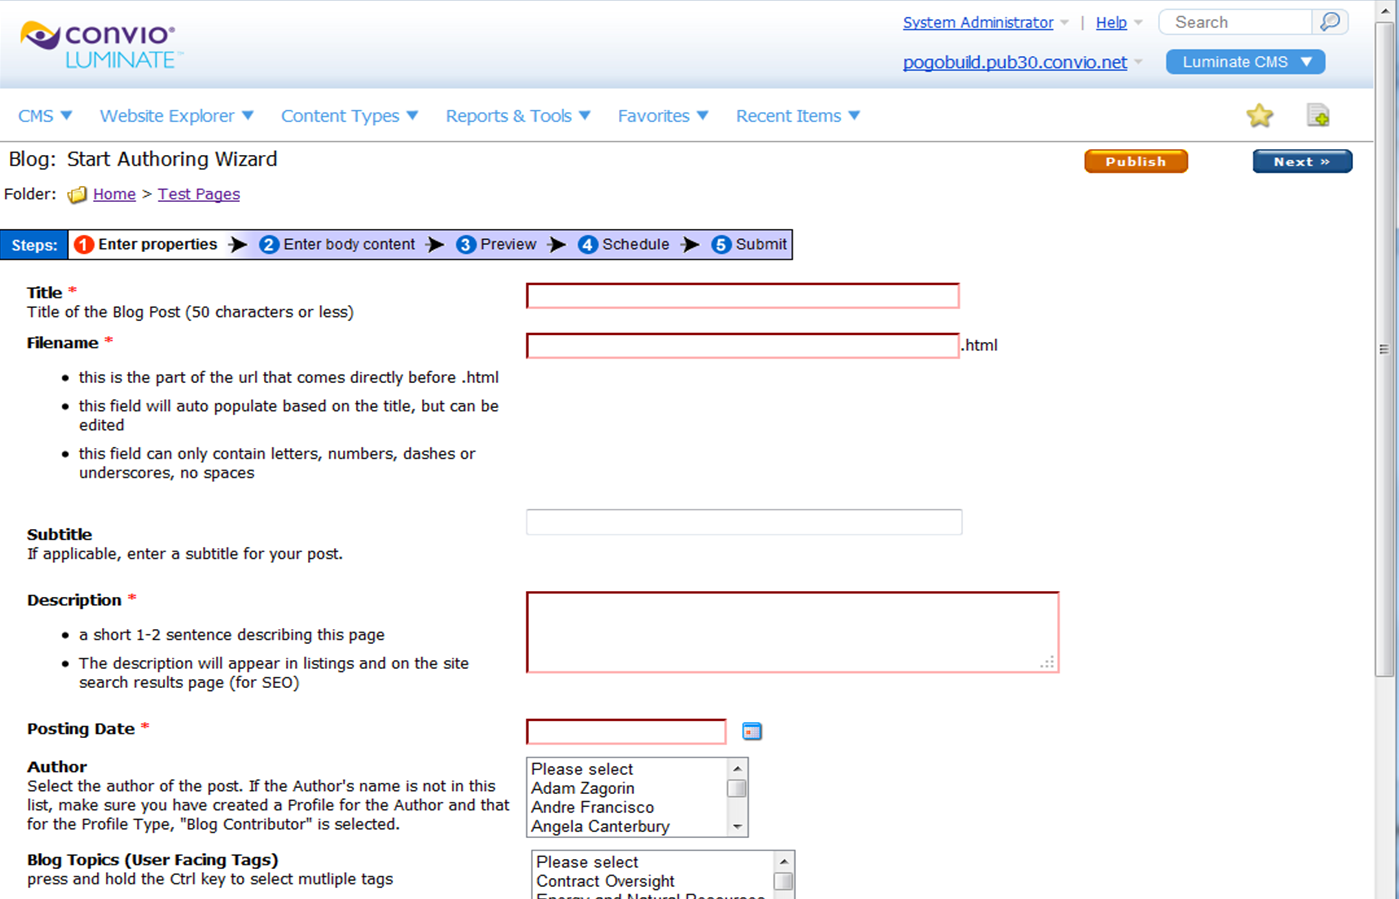 Shows the administrator authoring form for a Blog Post